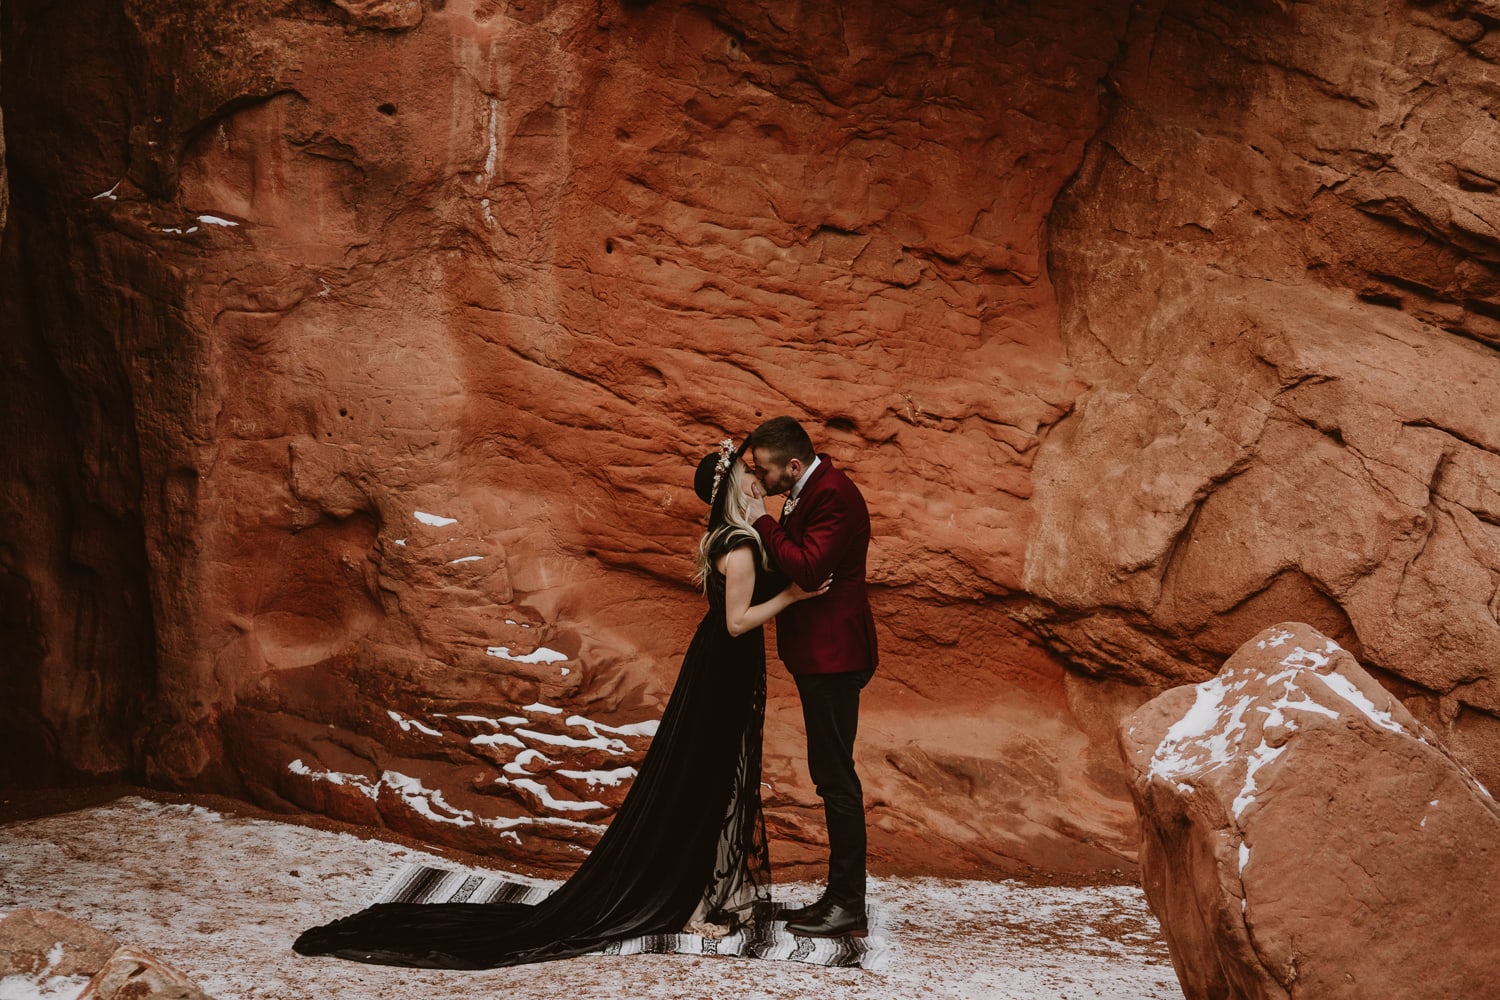 Bride and groom eloped at Sentinel Plaza in Garden of the Gods during the winter, and this is an image of their first kiss next to a dramatic rock formation